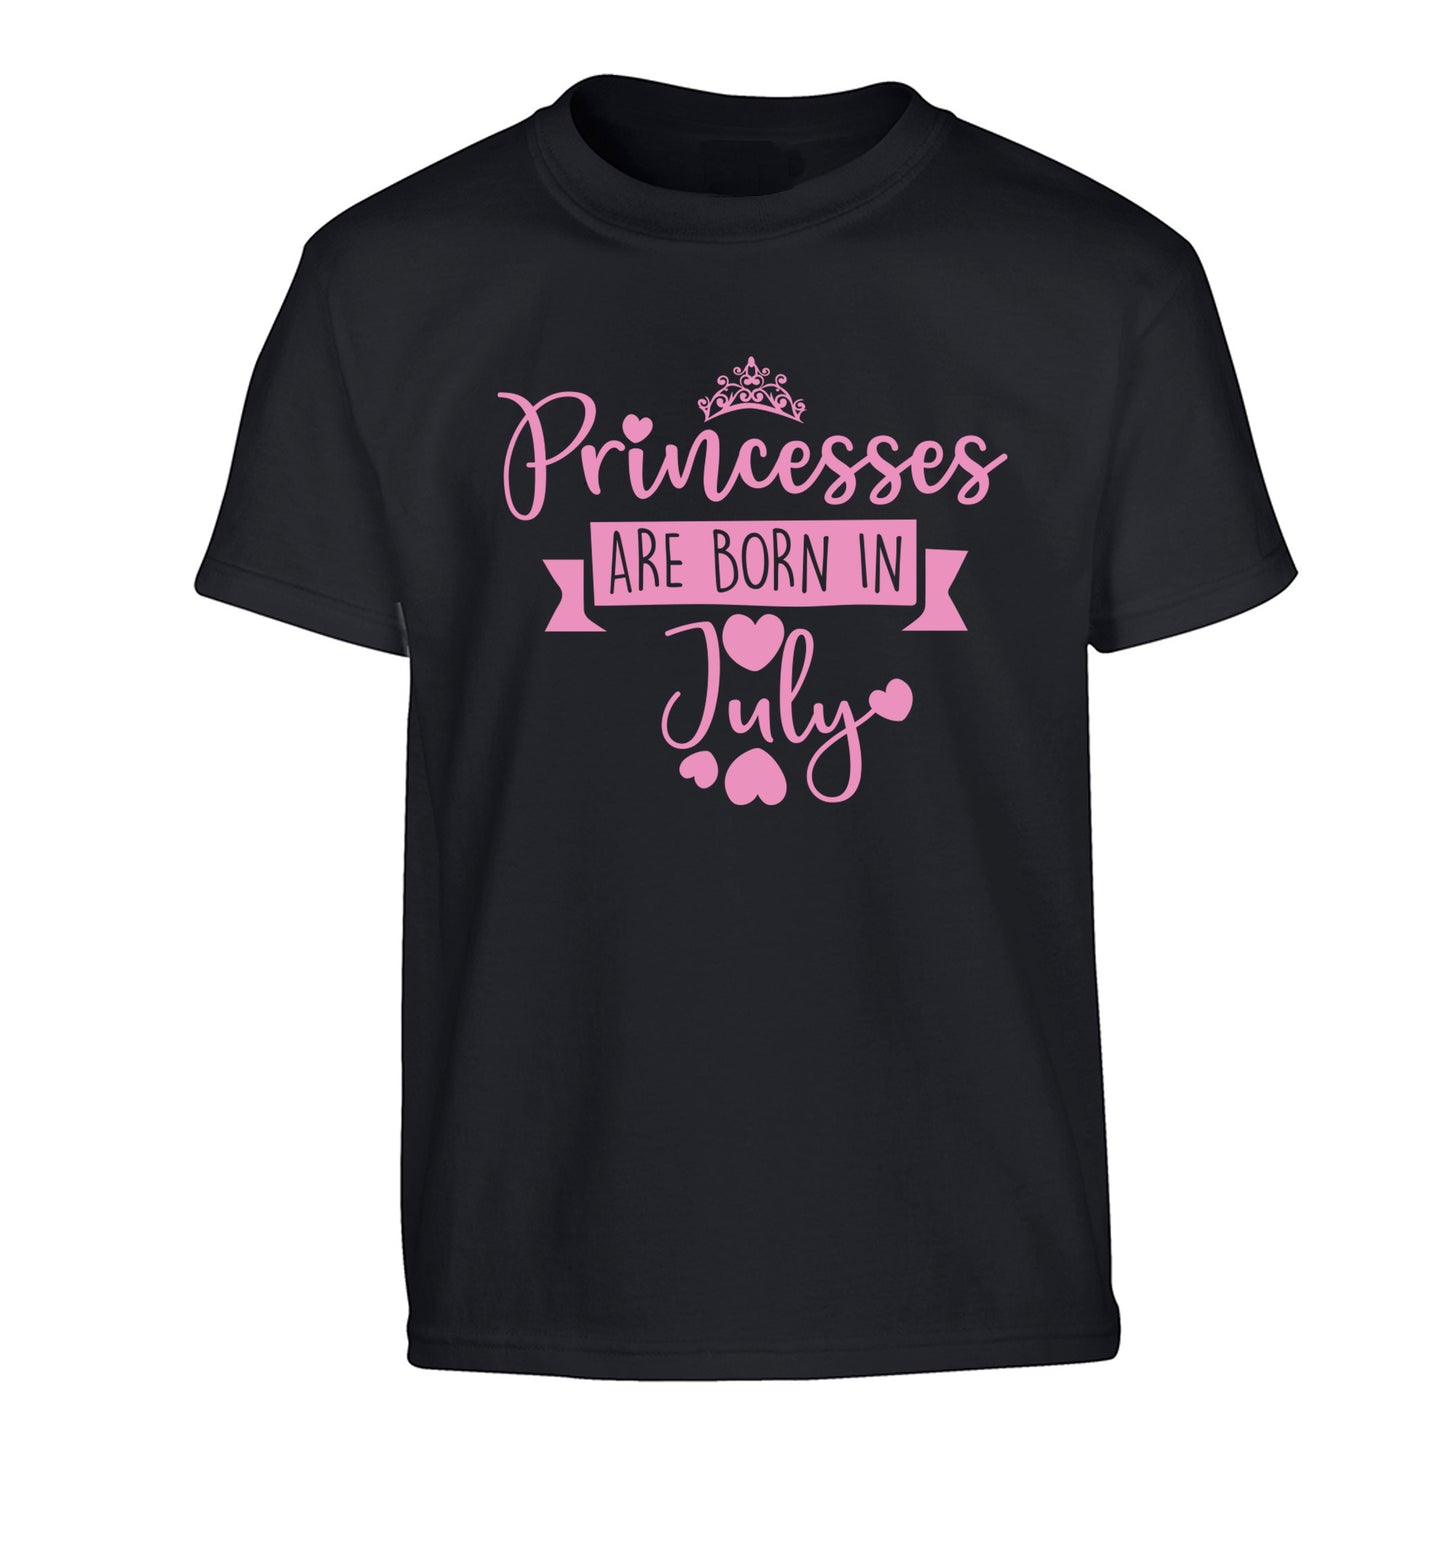 Princesses are born in July Children's black Tshirt 12-13 Years